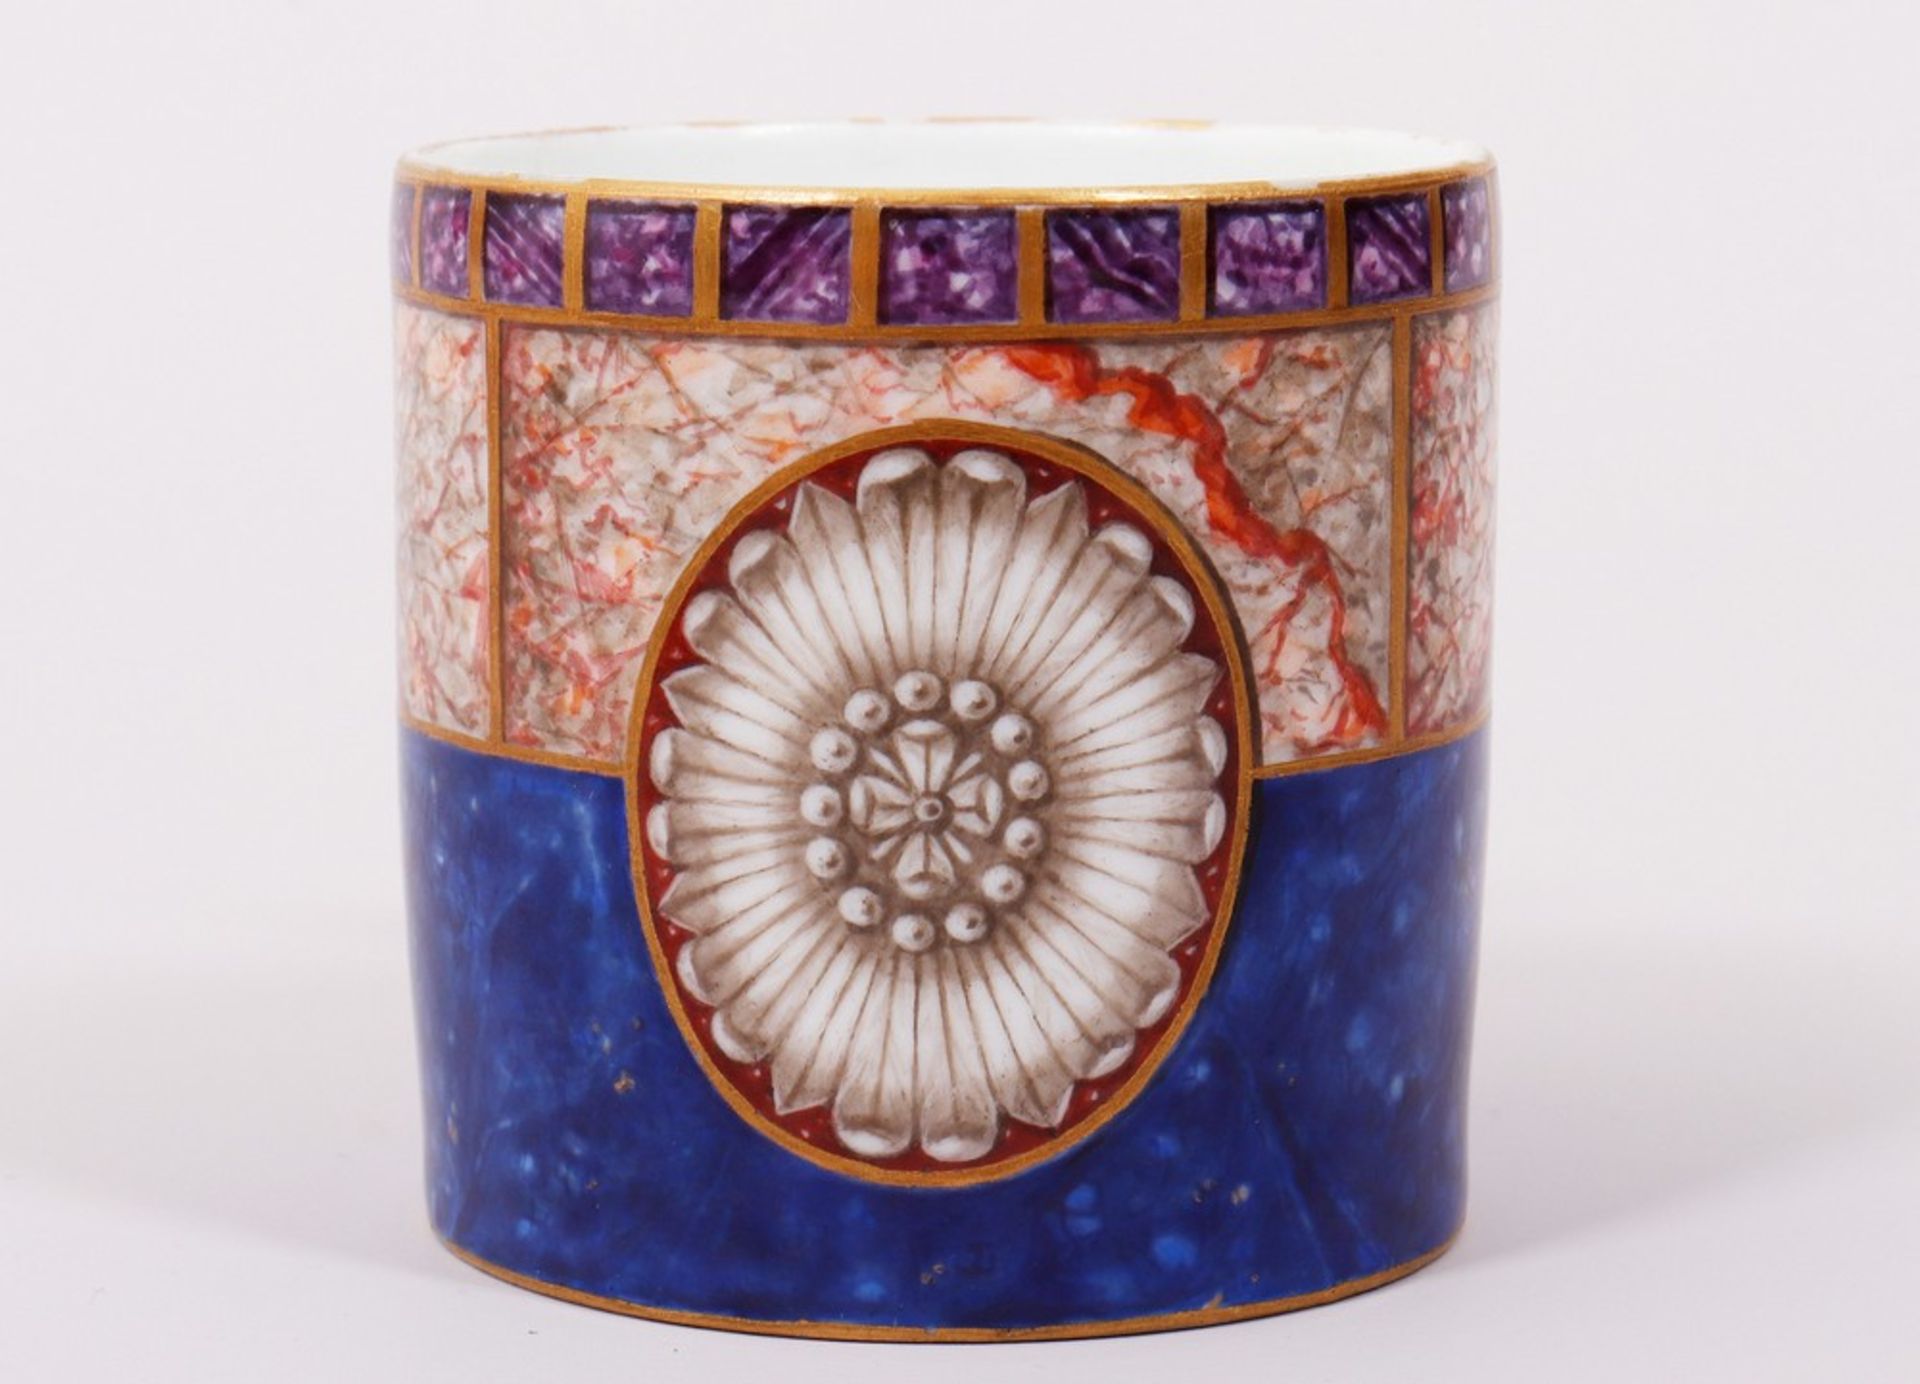 Empire cup with saucer, Meissen, Marcolini period, 1774-1814 - Image 3 of 7